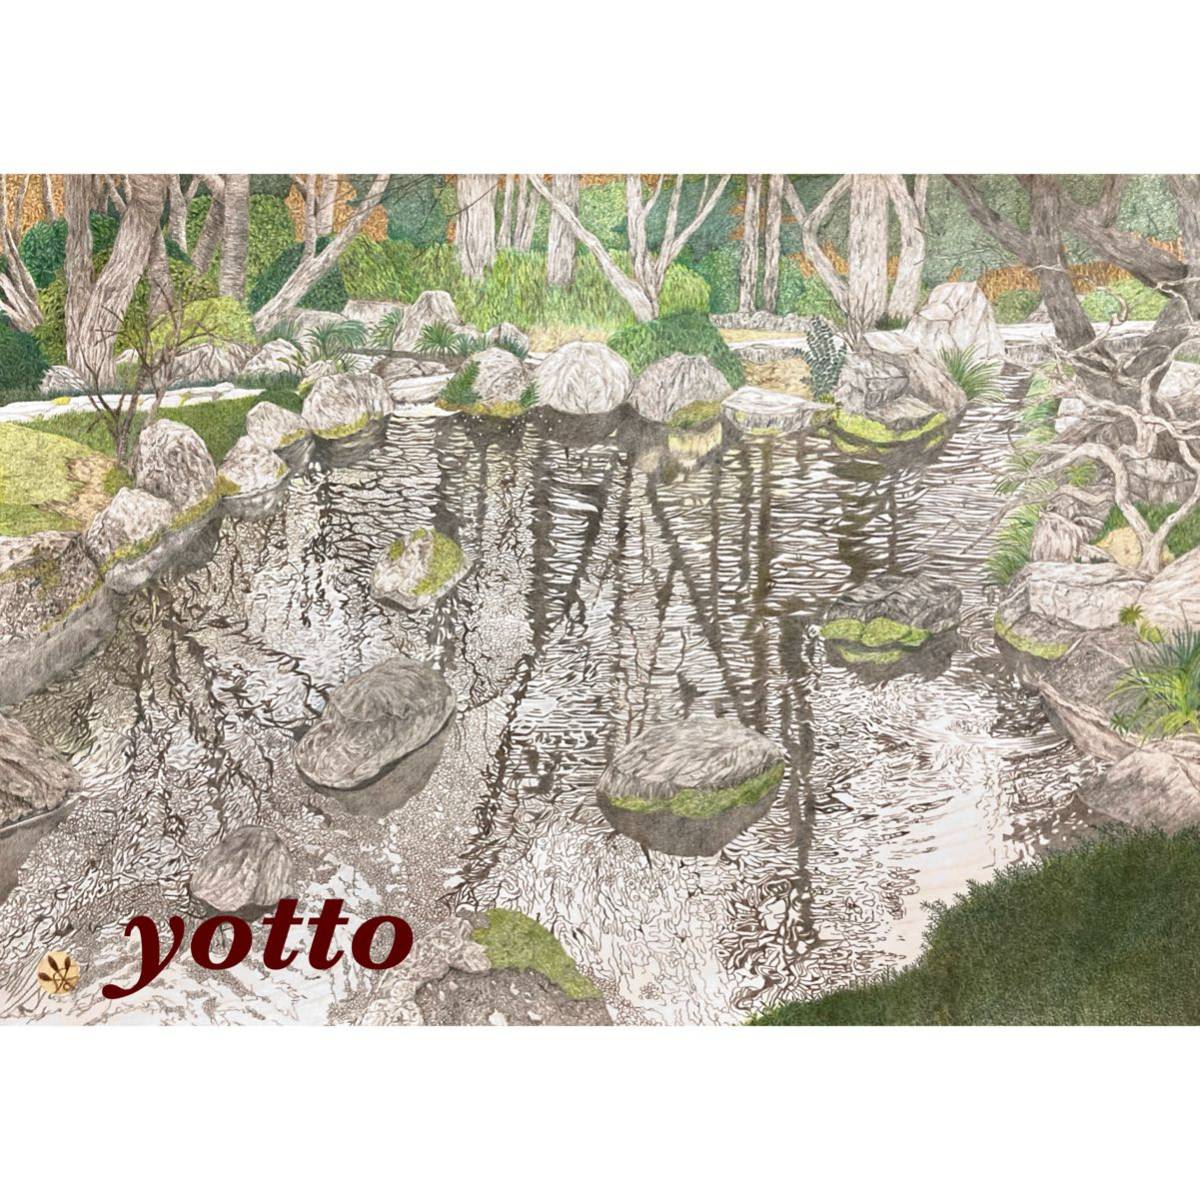 Colored pencil drawing [Serenity] A2 with frame ◇◆Hand-drawn ◇Original drawing ◆Landscape painting◇◆yotto, artwork, painting, pencil drawing, charcoal drawing